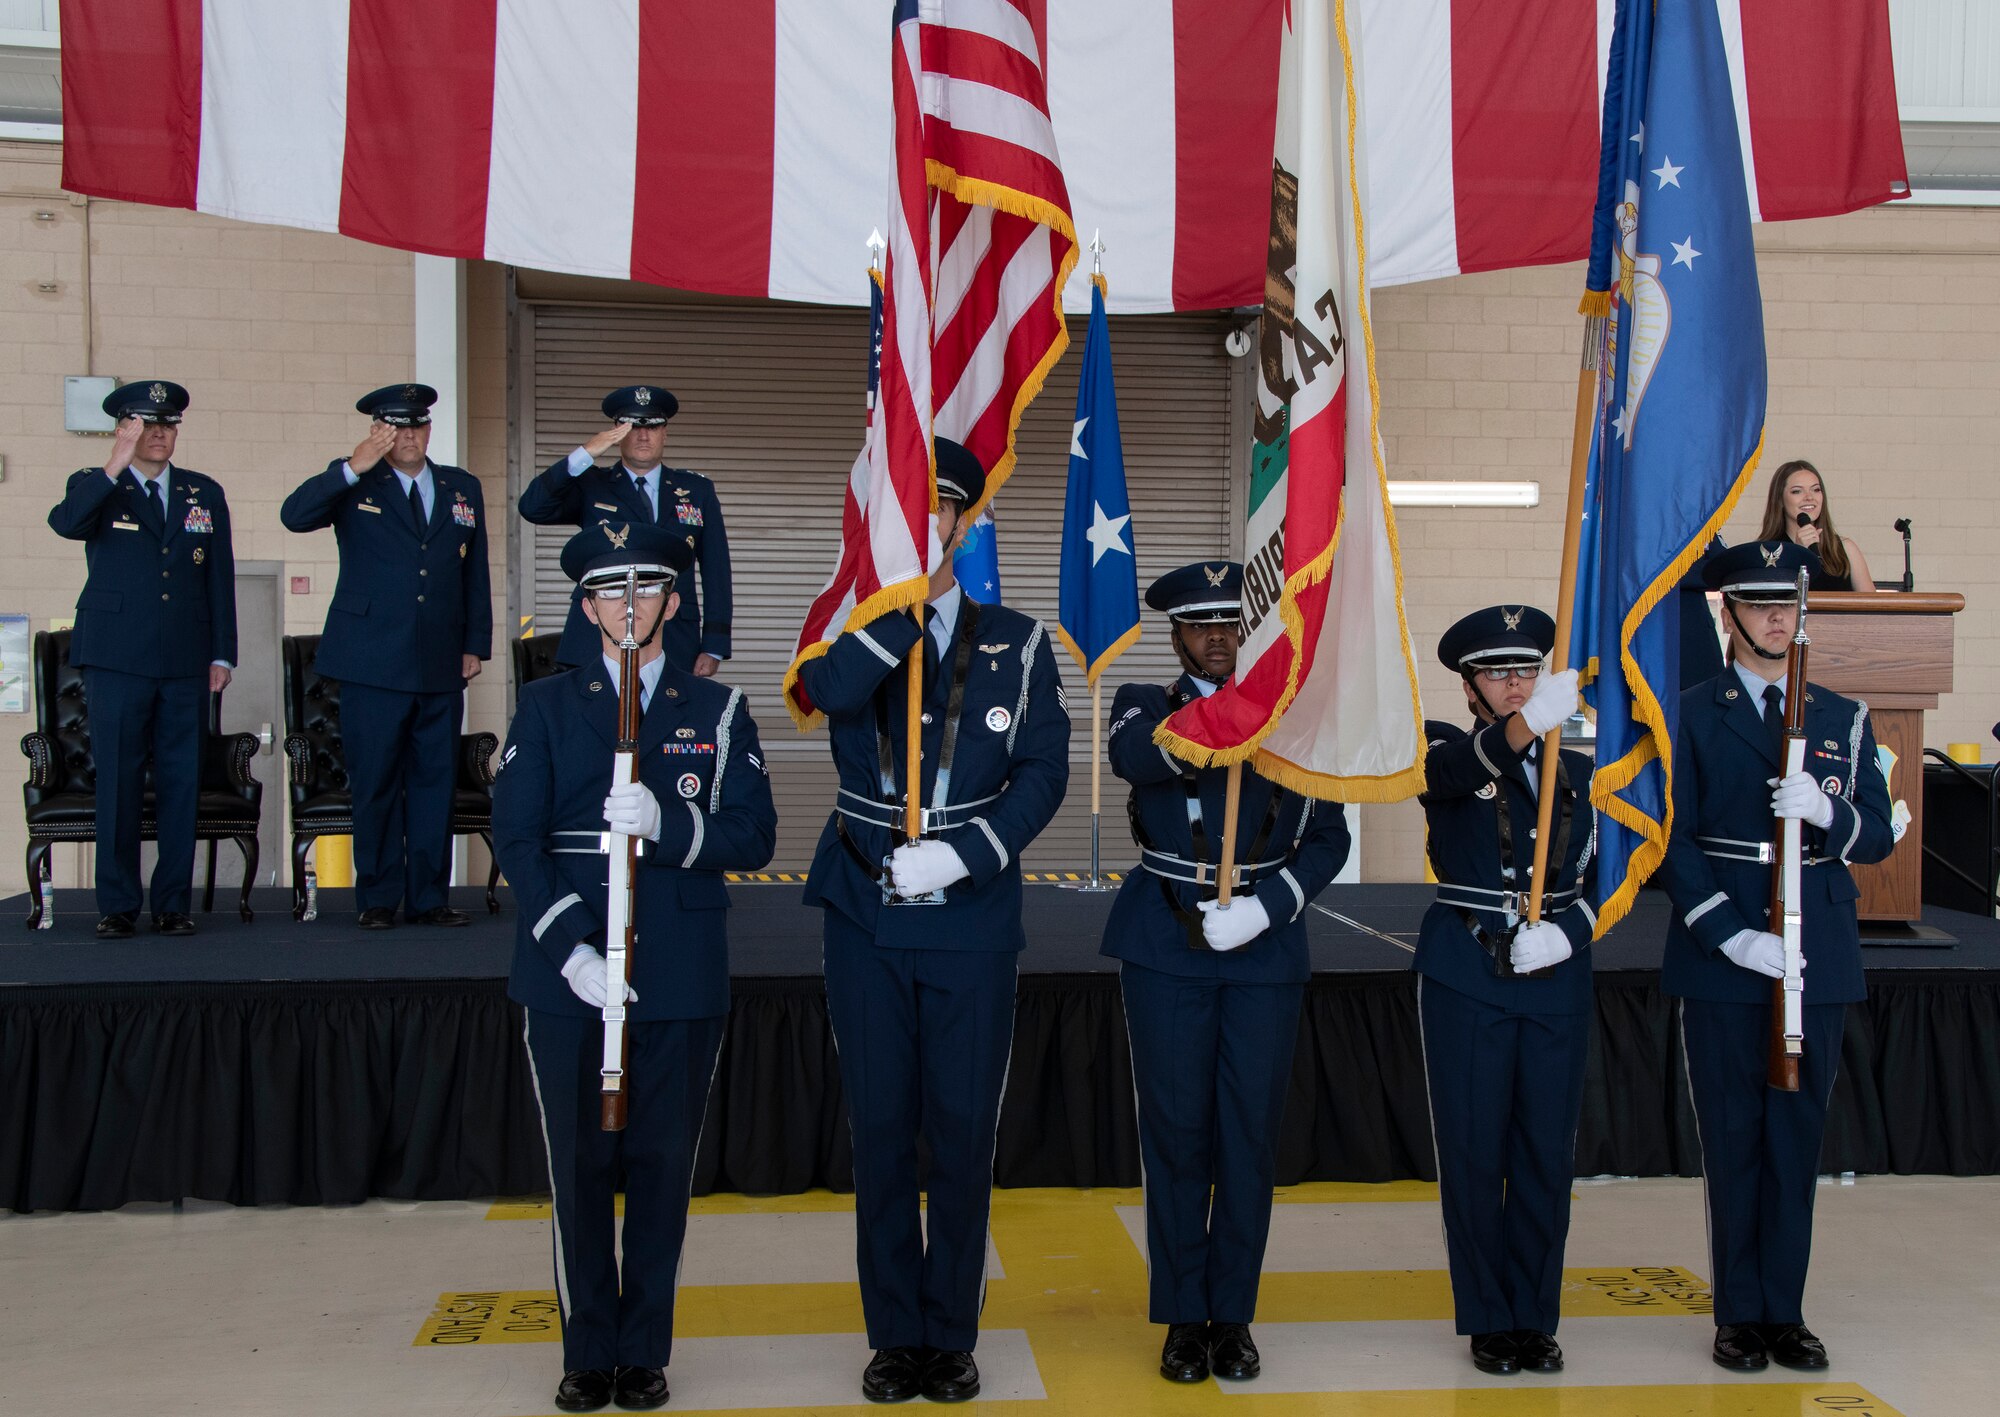 The Travis Elite Honor Guard post the colors during the 60th Air Mobility Wing change of command ceremony at Travis Air Force Base, California, July 27, 2022. A change of command ceremony is a military tradition of formal transfer of command, responsibilities and authority from one commander to another. (U.S. Air Force photo by Heide Couch)